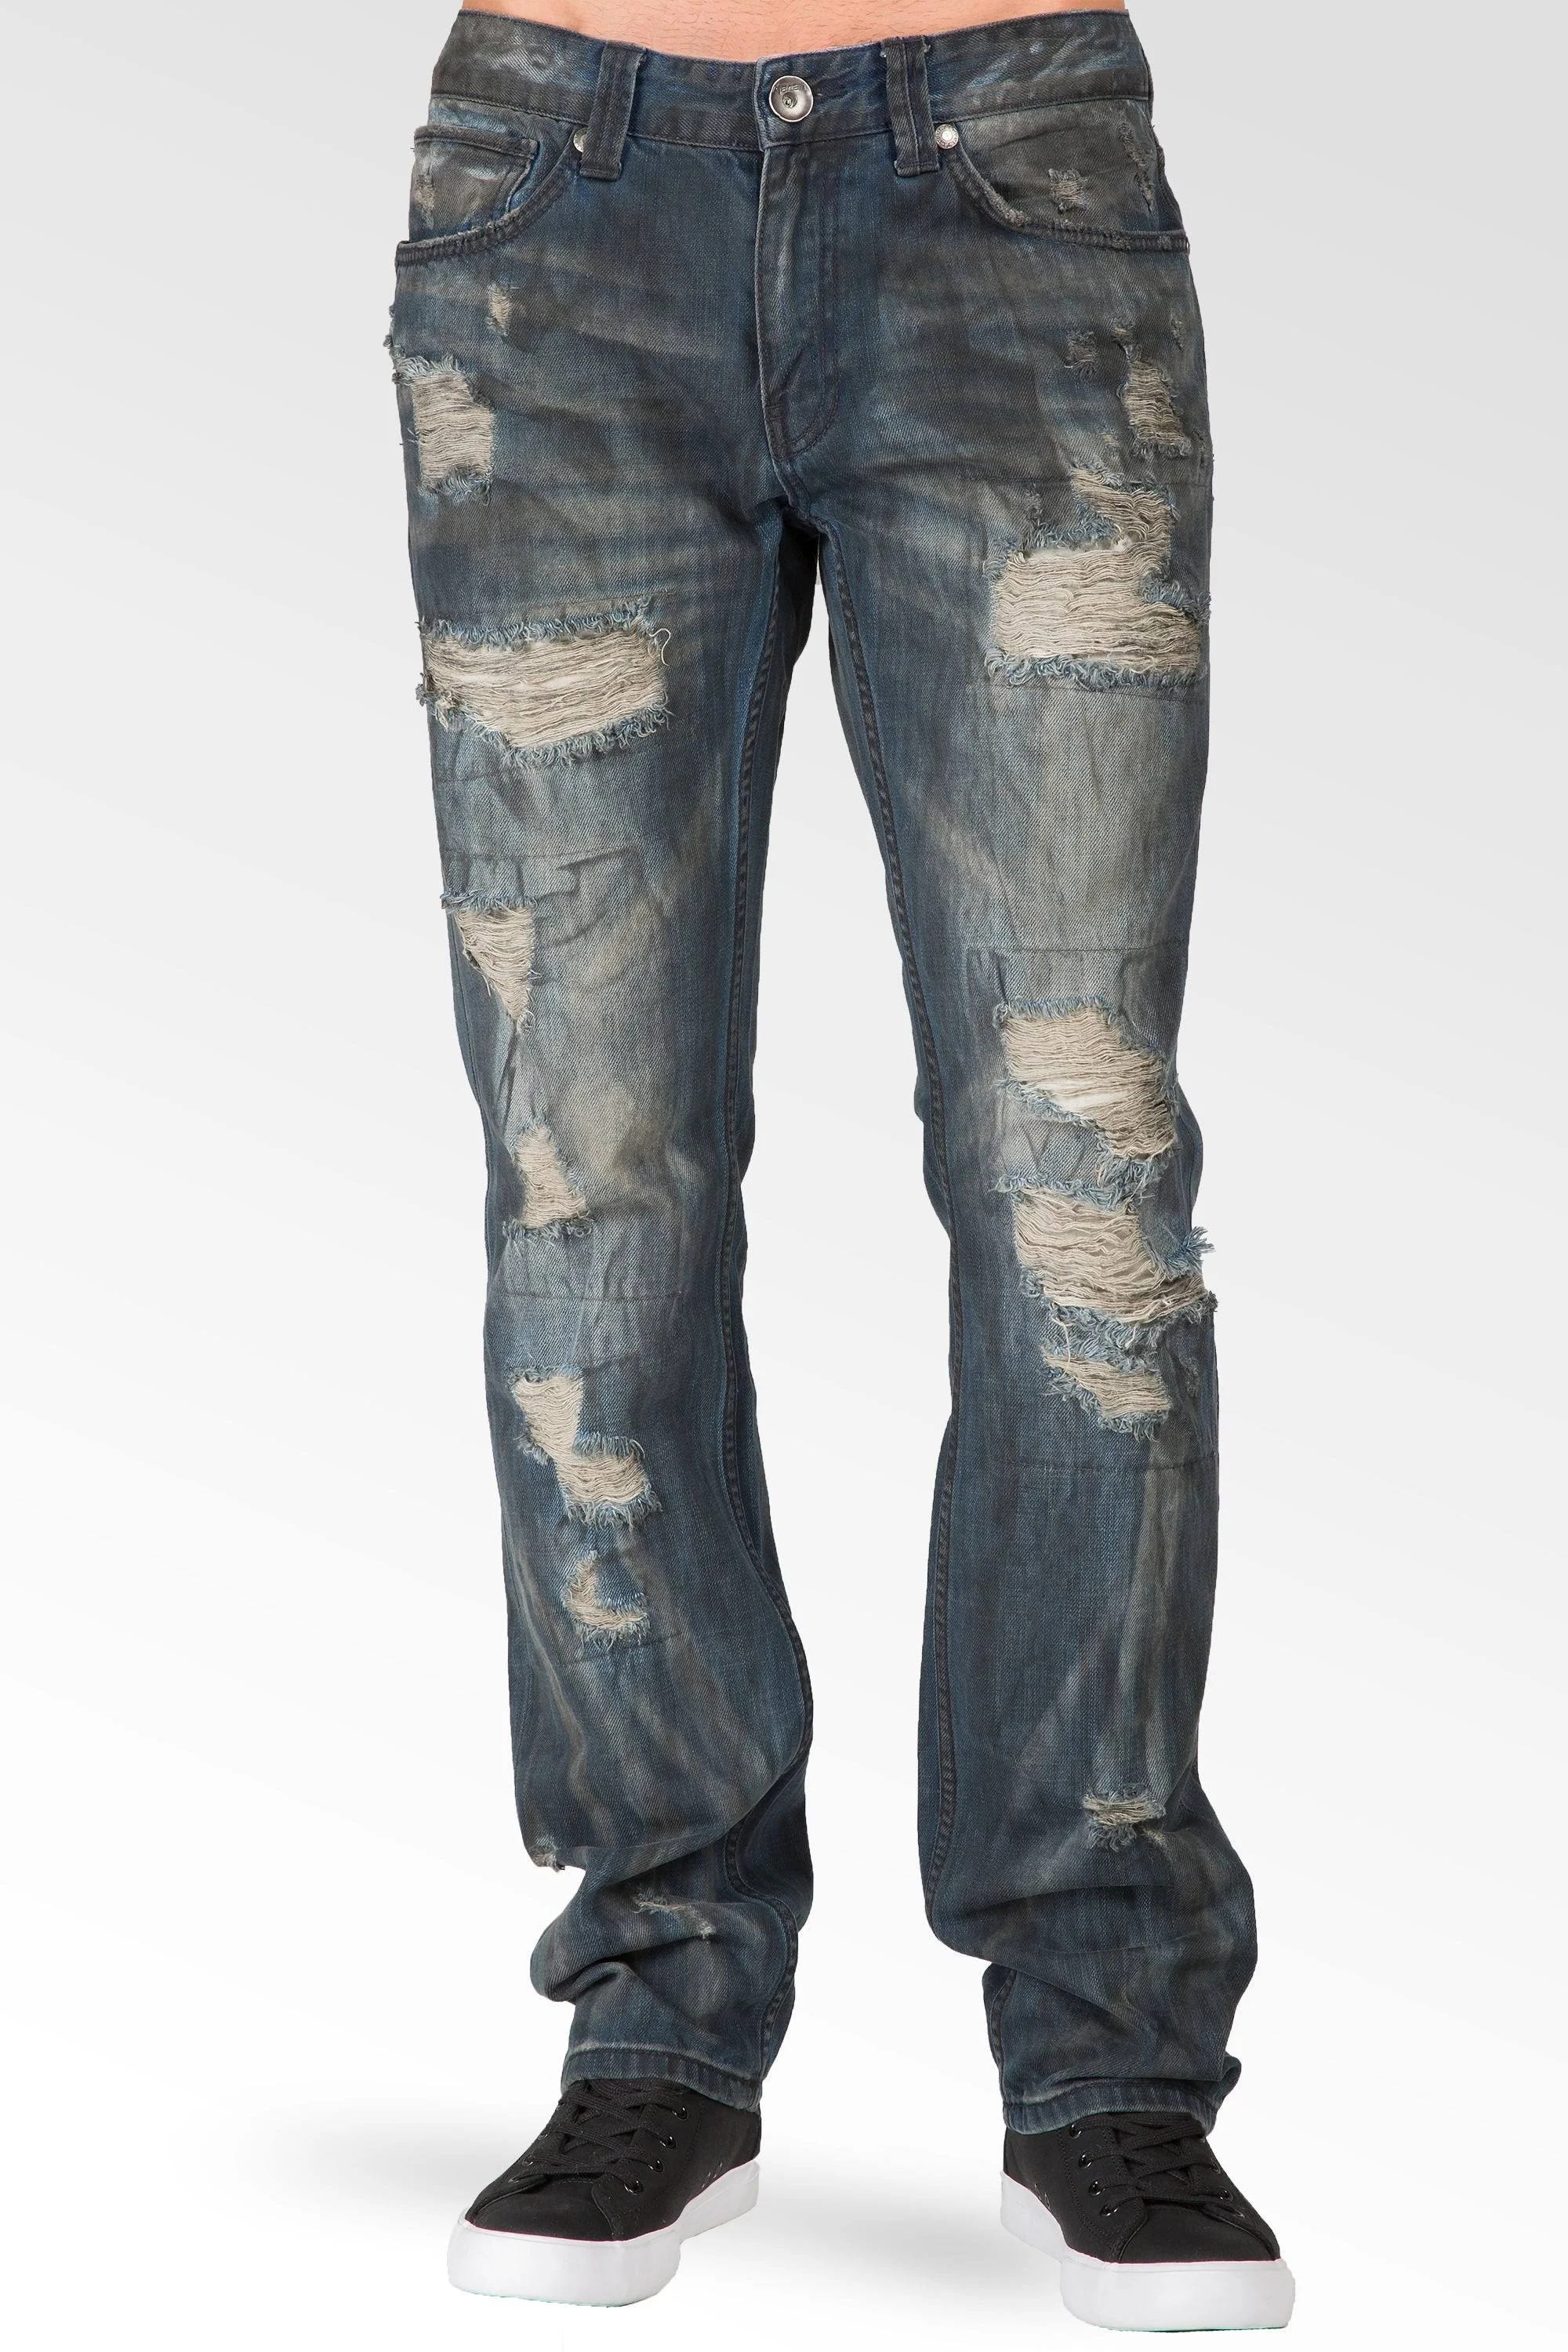 Premium Ripped Jeans: Slim Fit, Trendy Destroyed Design in Black Tint | Image